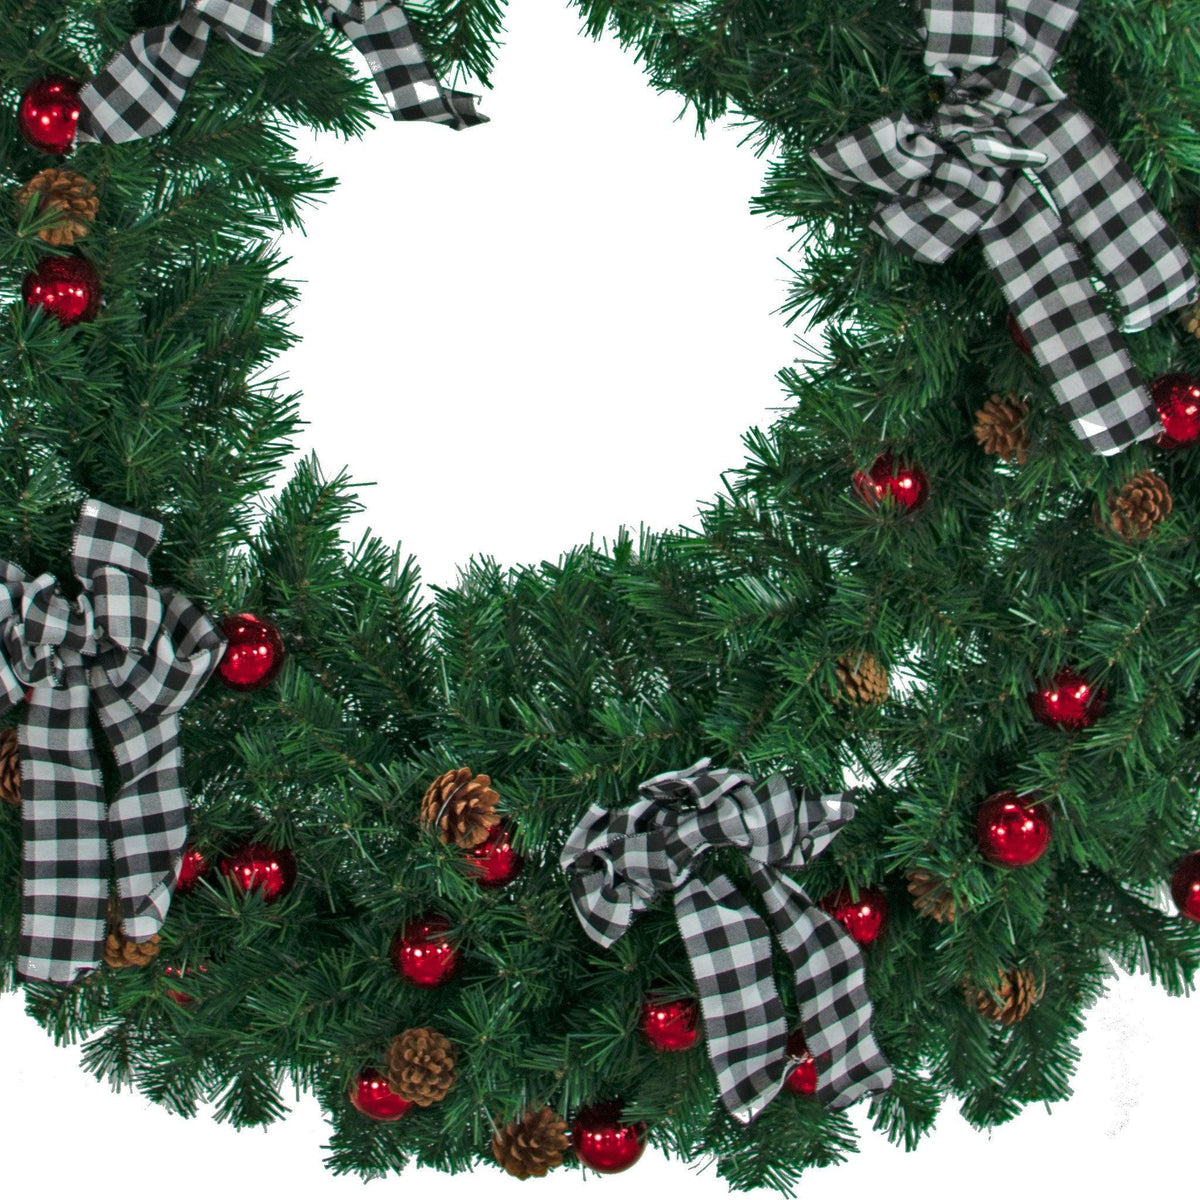 Lee Display's brand new and custom-designed 4FT Un-Lit Premier Pine Fir Christmas Wreaths available for purchase, rent, and installation services at leedisplay.com